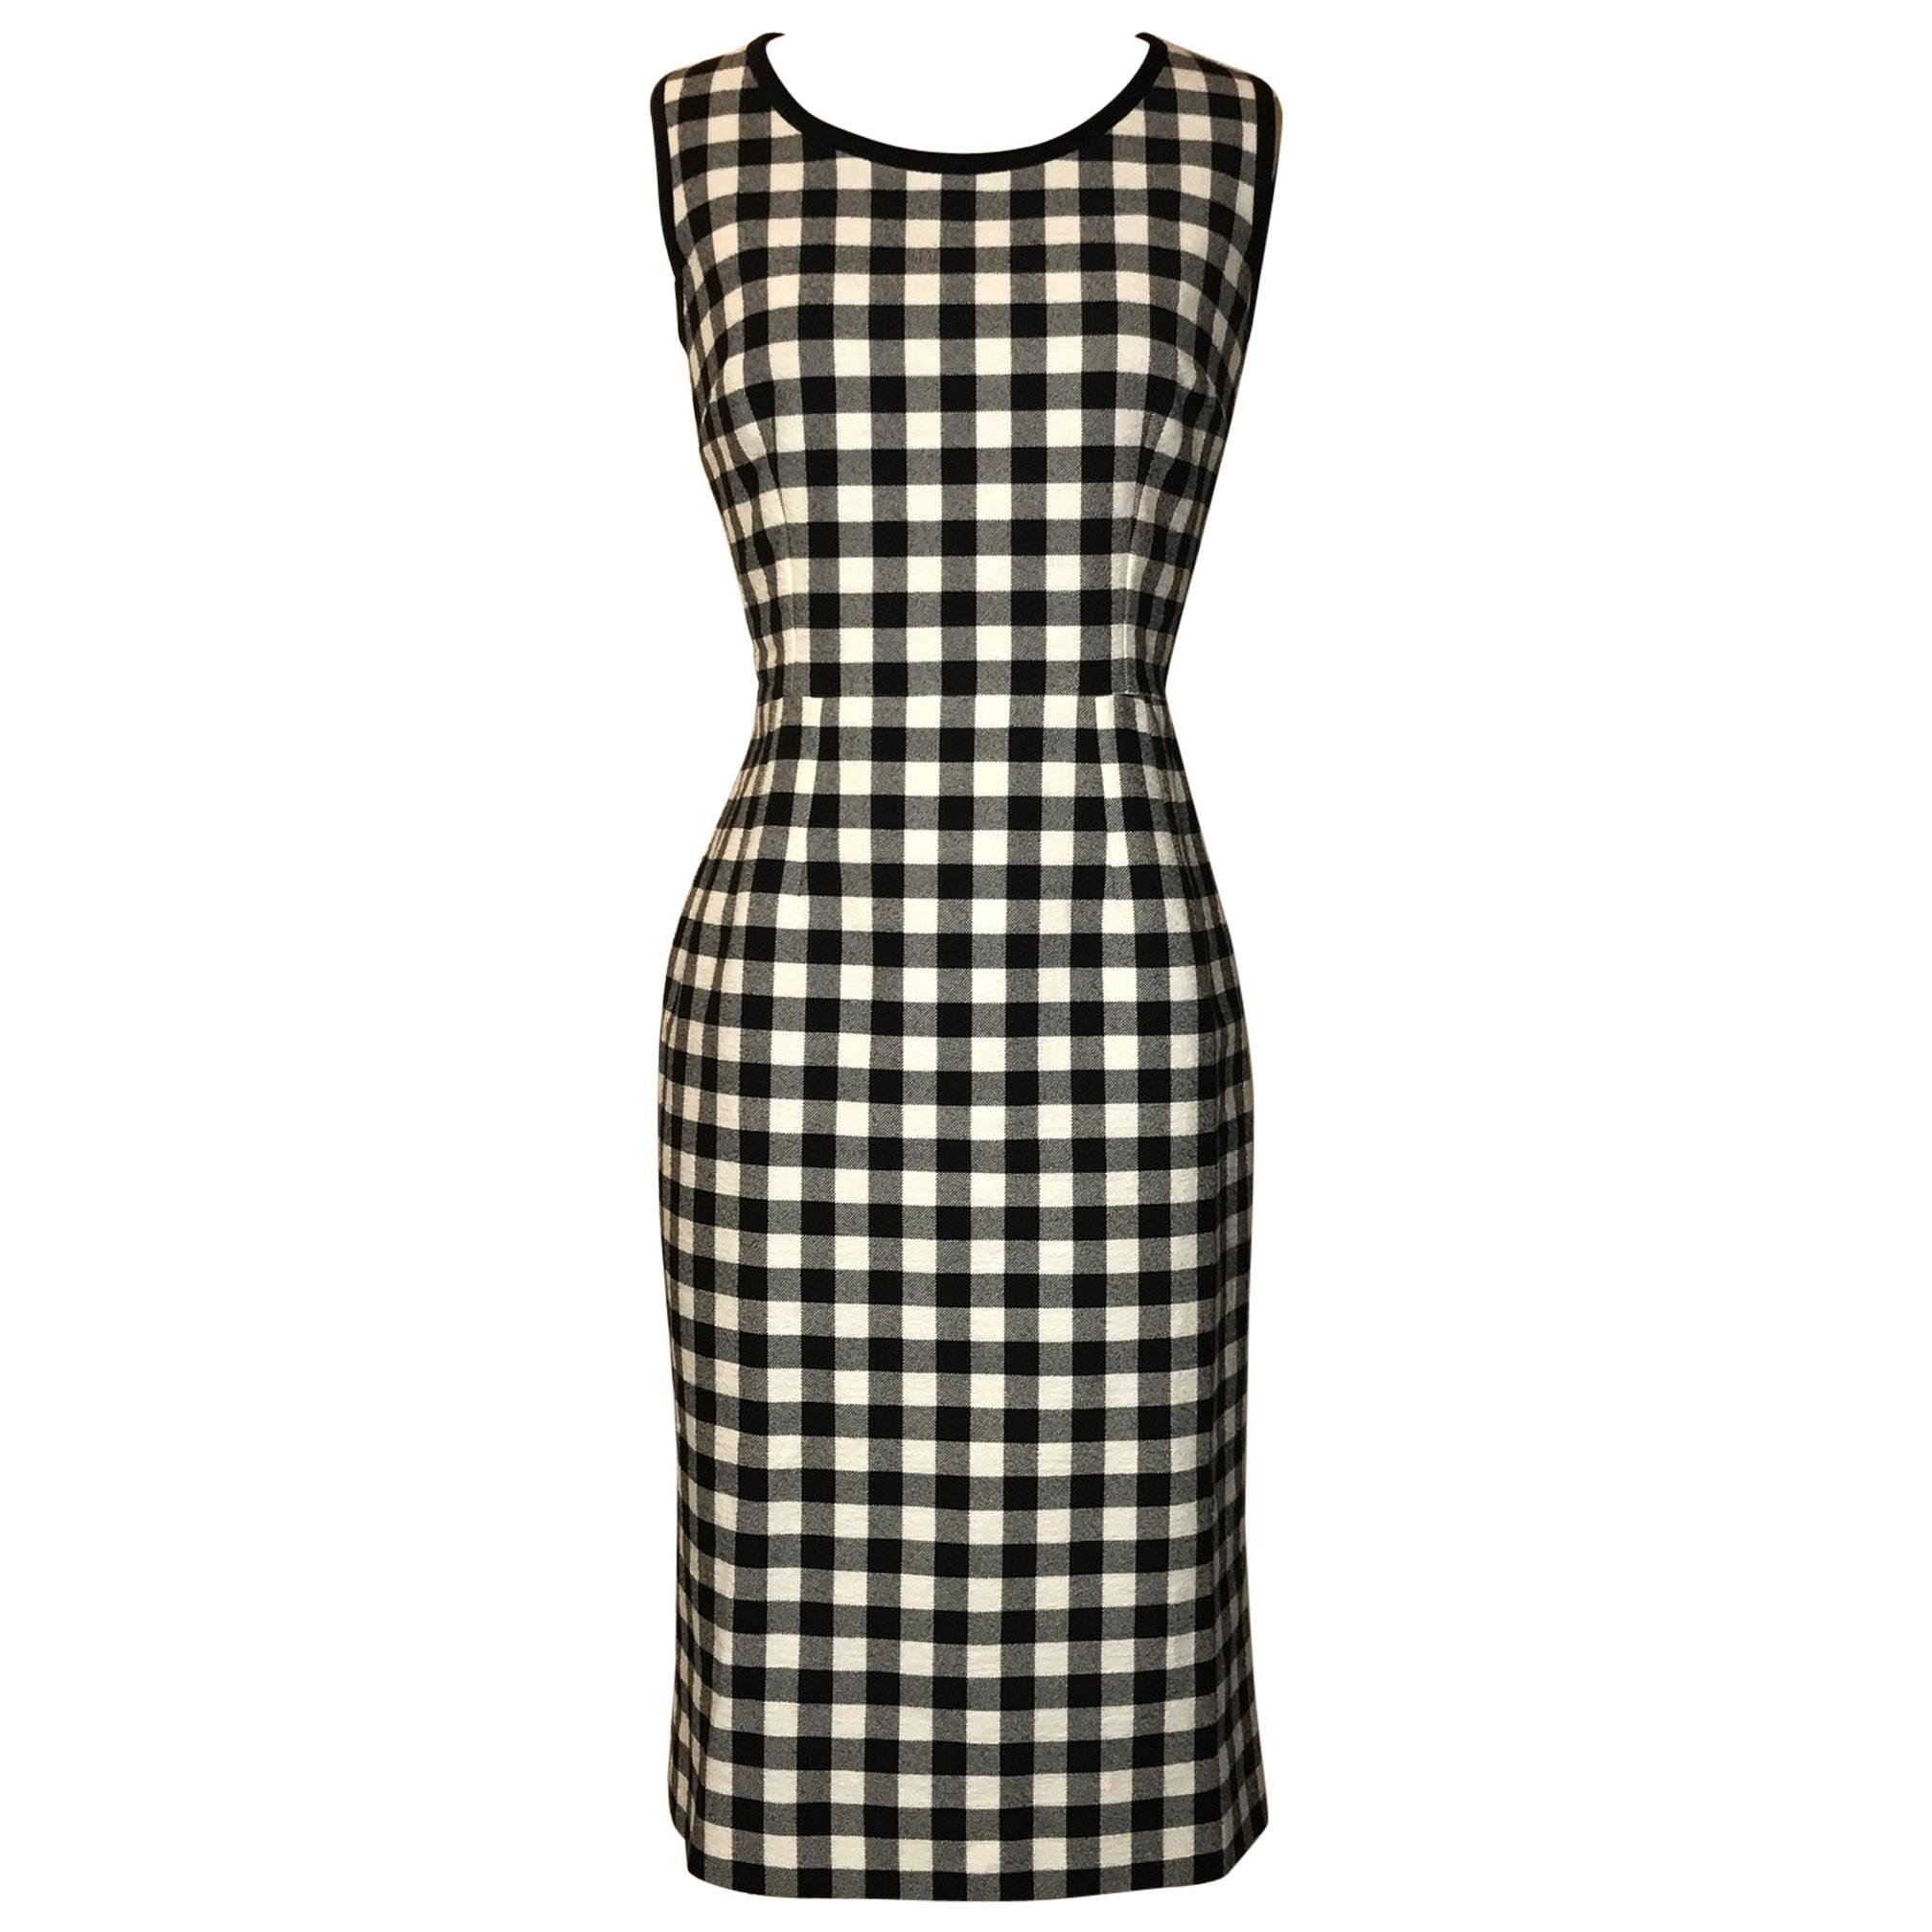 Dolce & Gabbana New with Tags Black and White Check Sleeveless Pencil Dress 